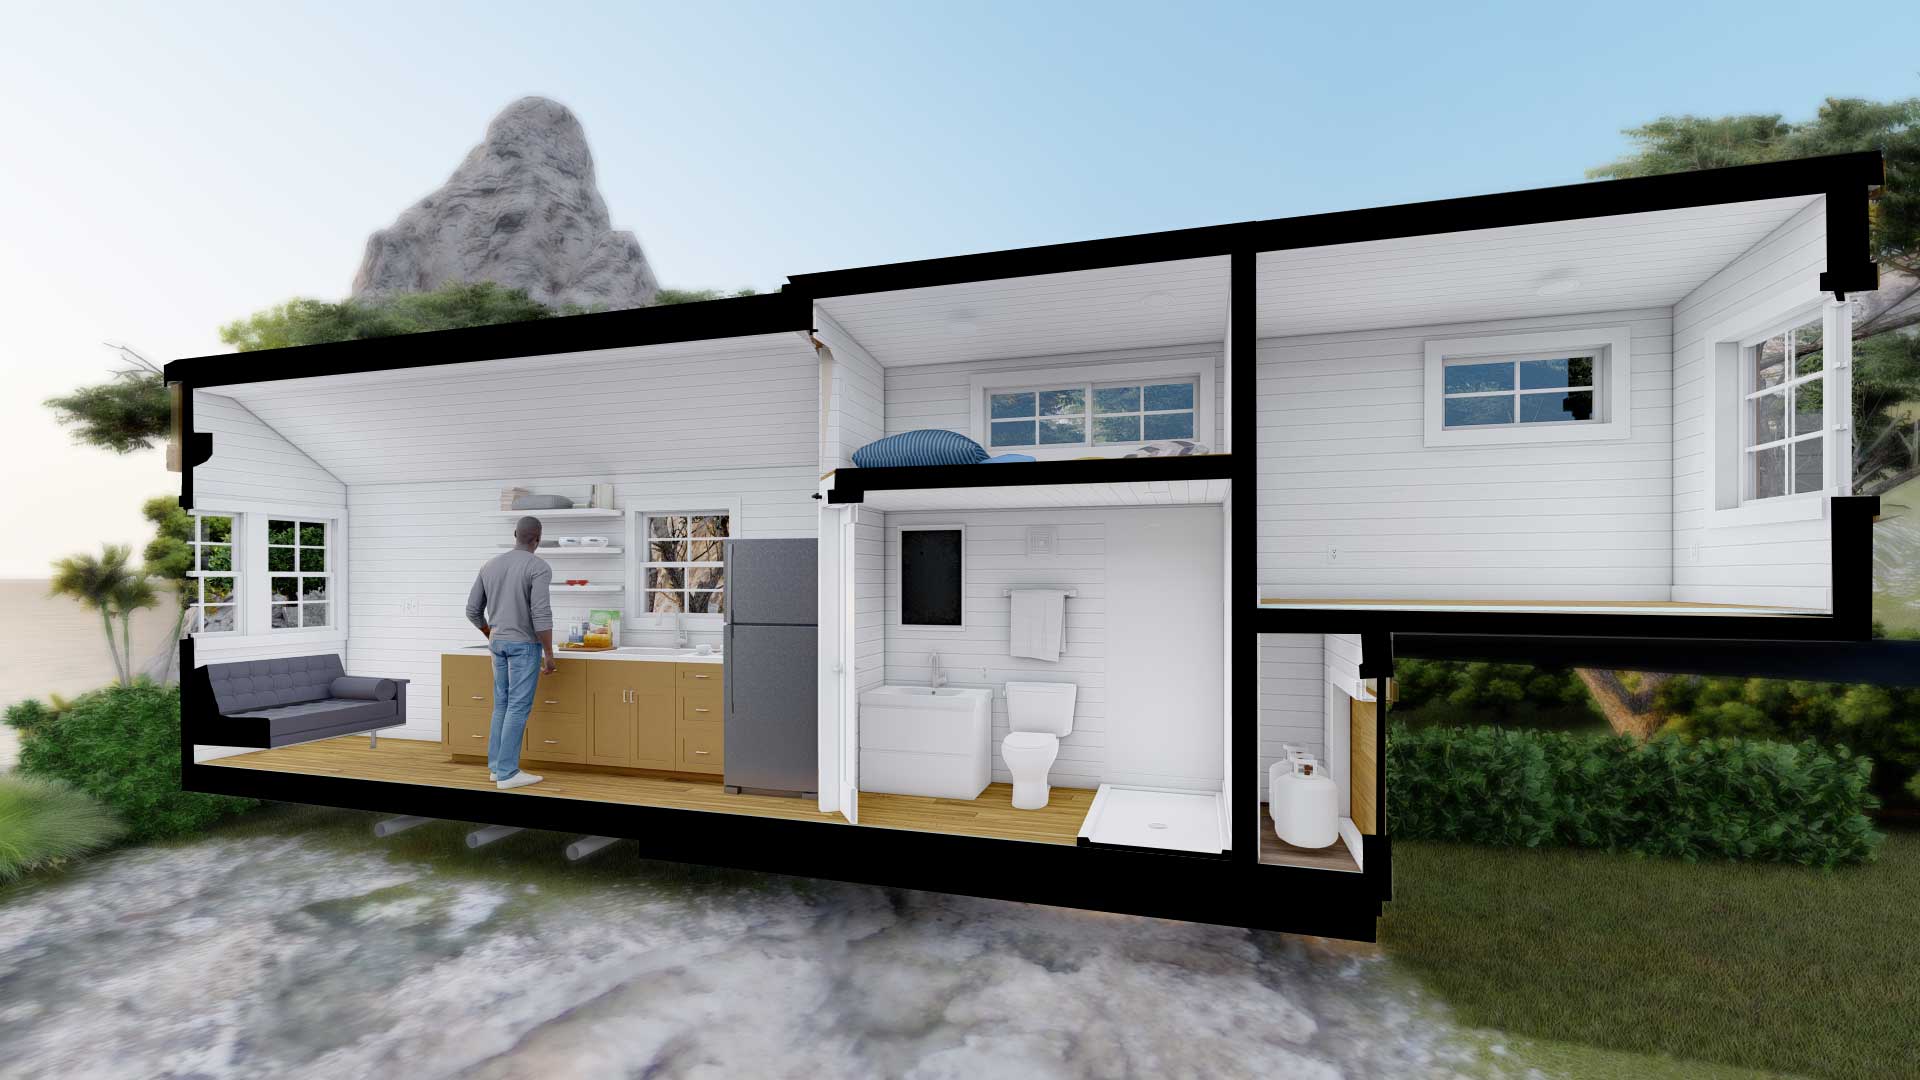 3d cutaway showing the interior of a Craftsman style tiny house